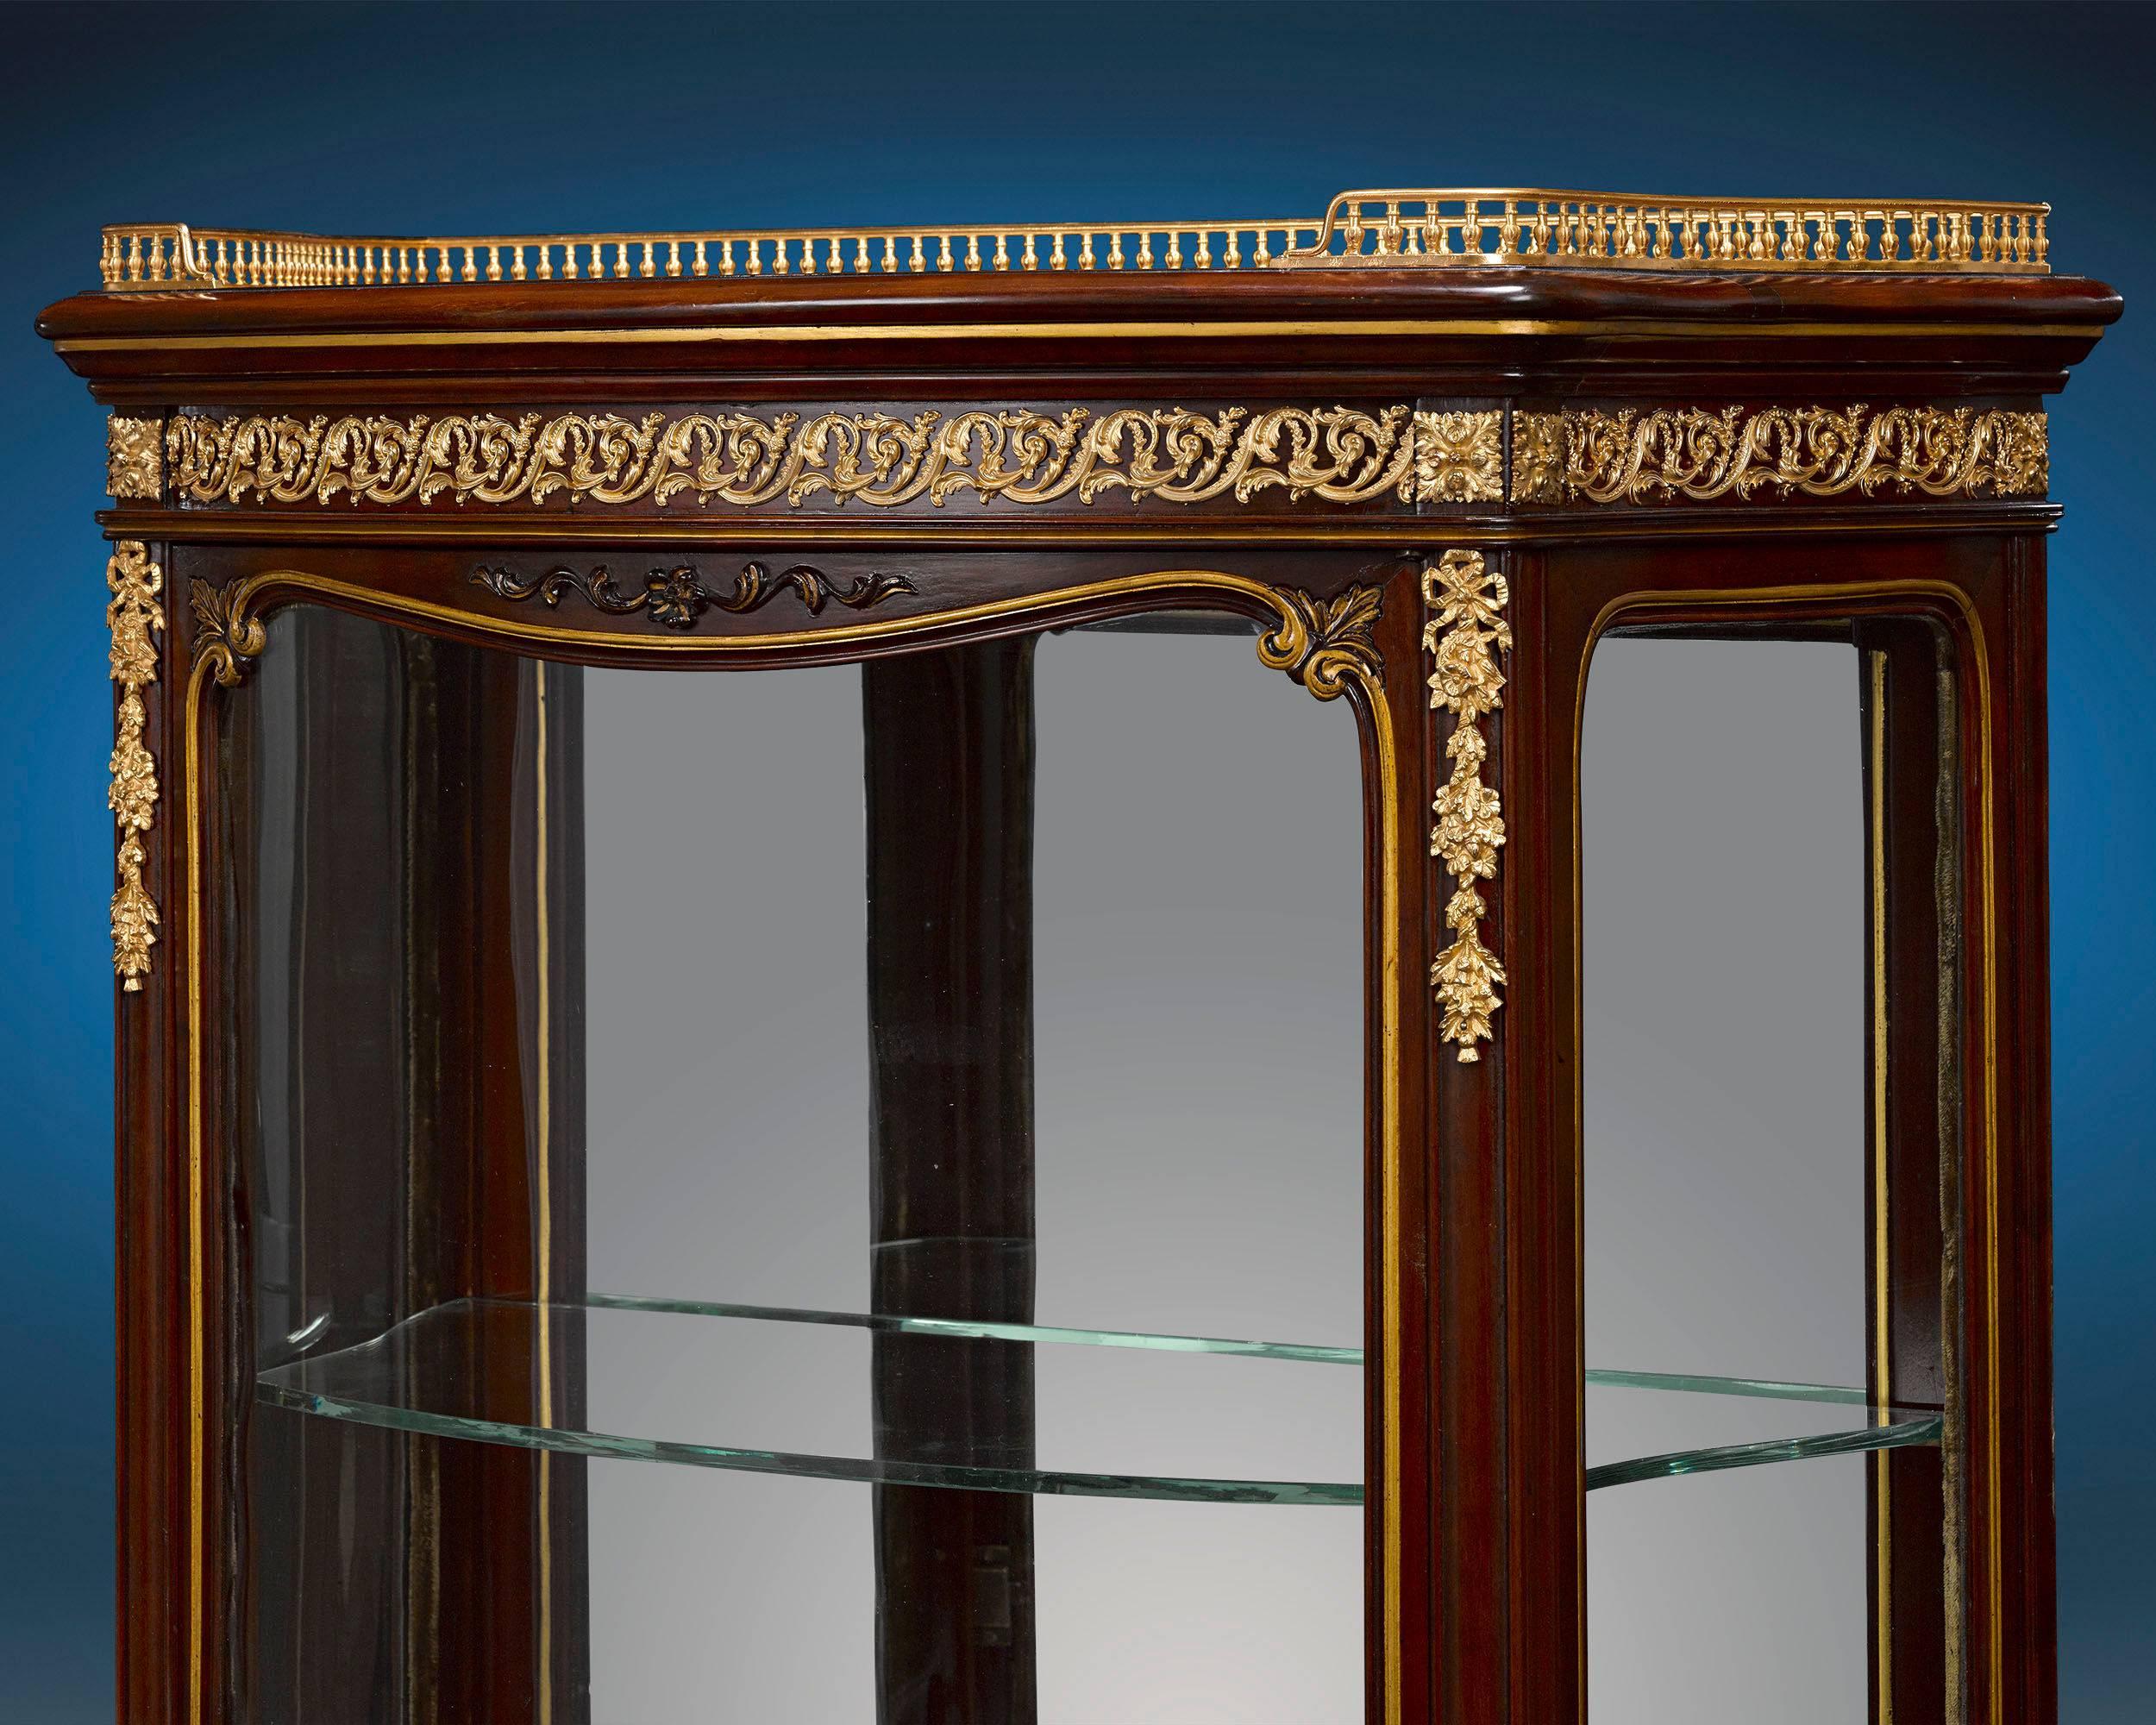 This rare and stunning vitrine was crafted by the illustrious French ébéniste François Linke. A master of the Louis XVI style, Linke was renowned for his highly original designs that blended the opulence of Rococo with elements of the Art